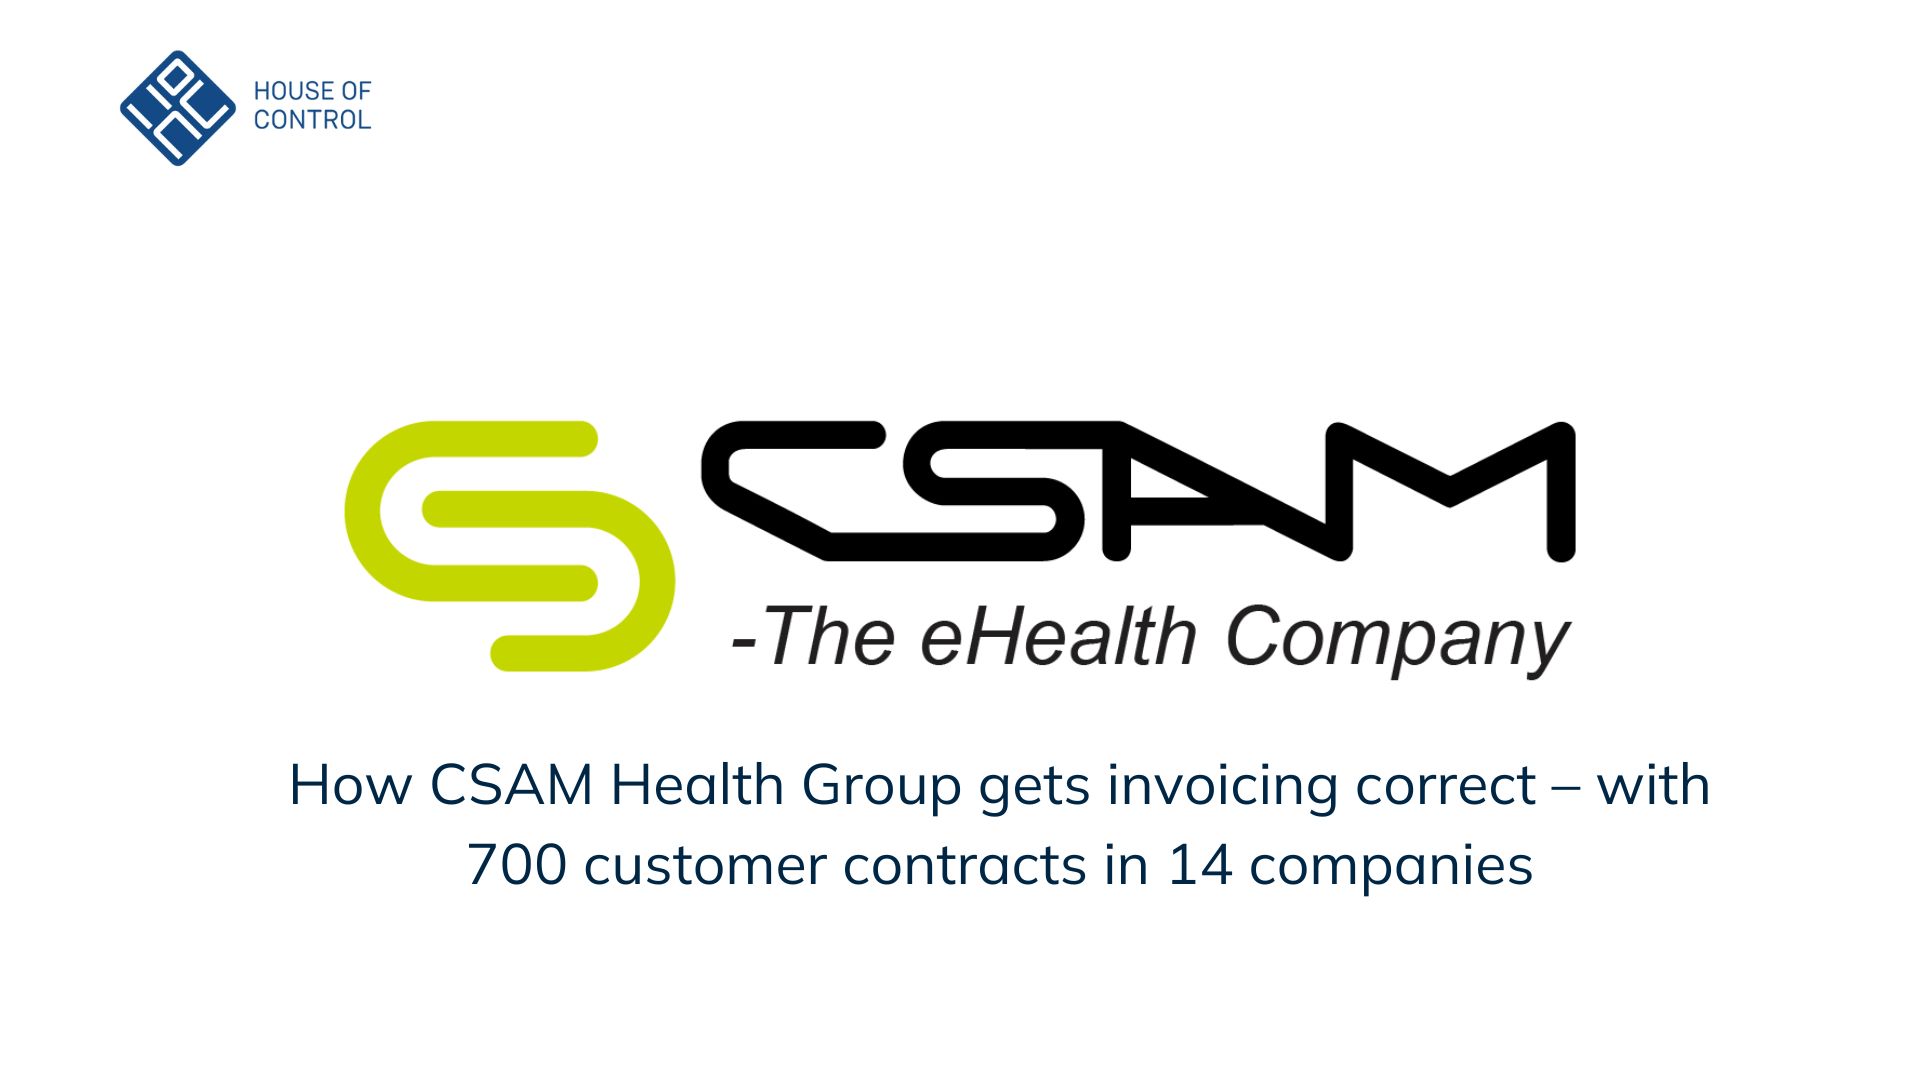 How CSAM Health Group gets invoicing correct - with 700 customer contracts in 14 companies